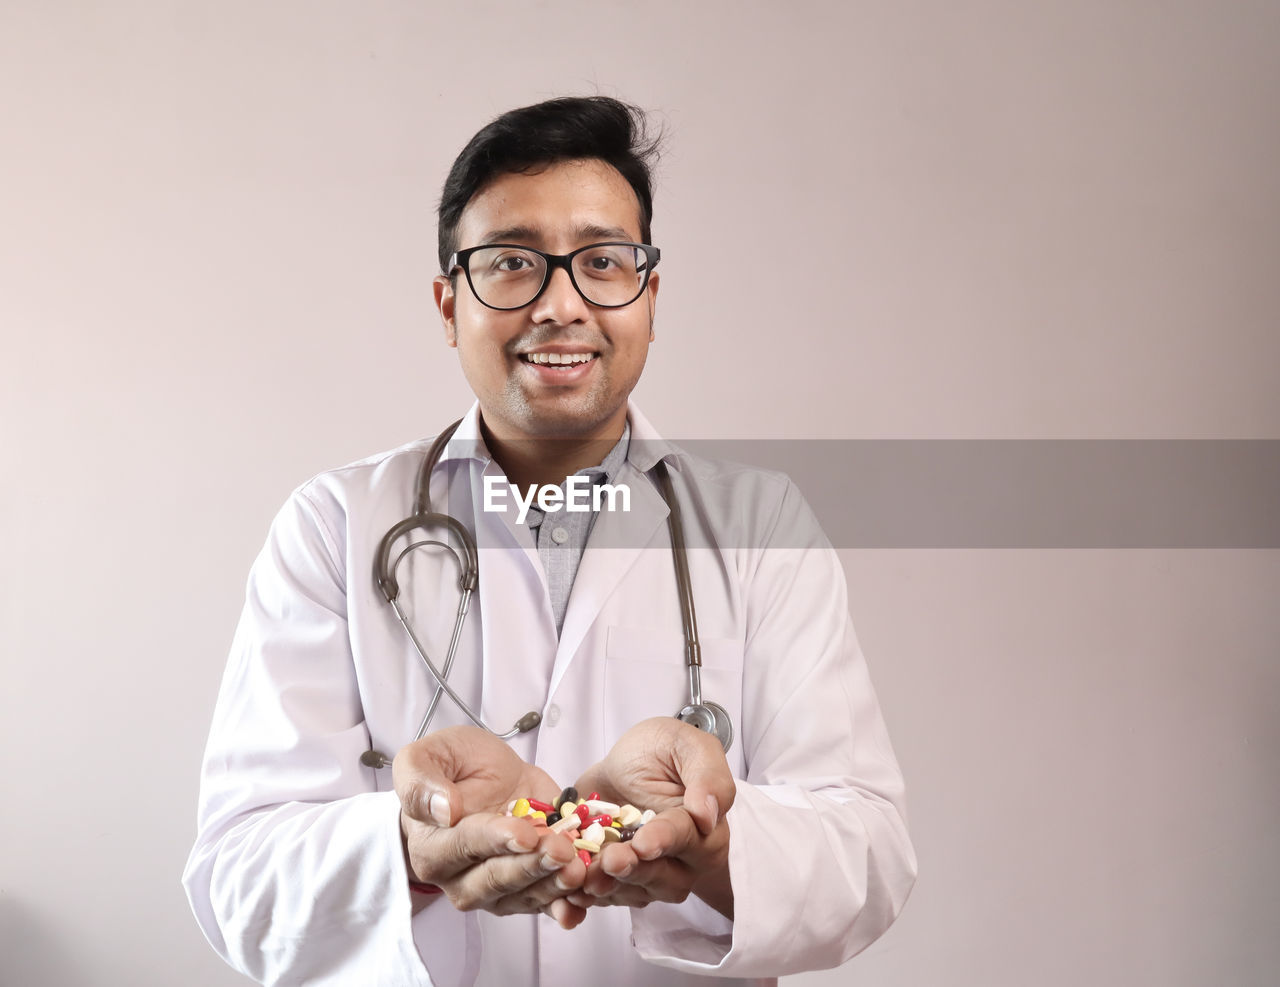 Portrait of smiling doctor holding capsules while standing against beige background